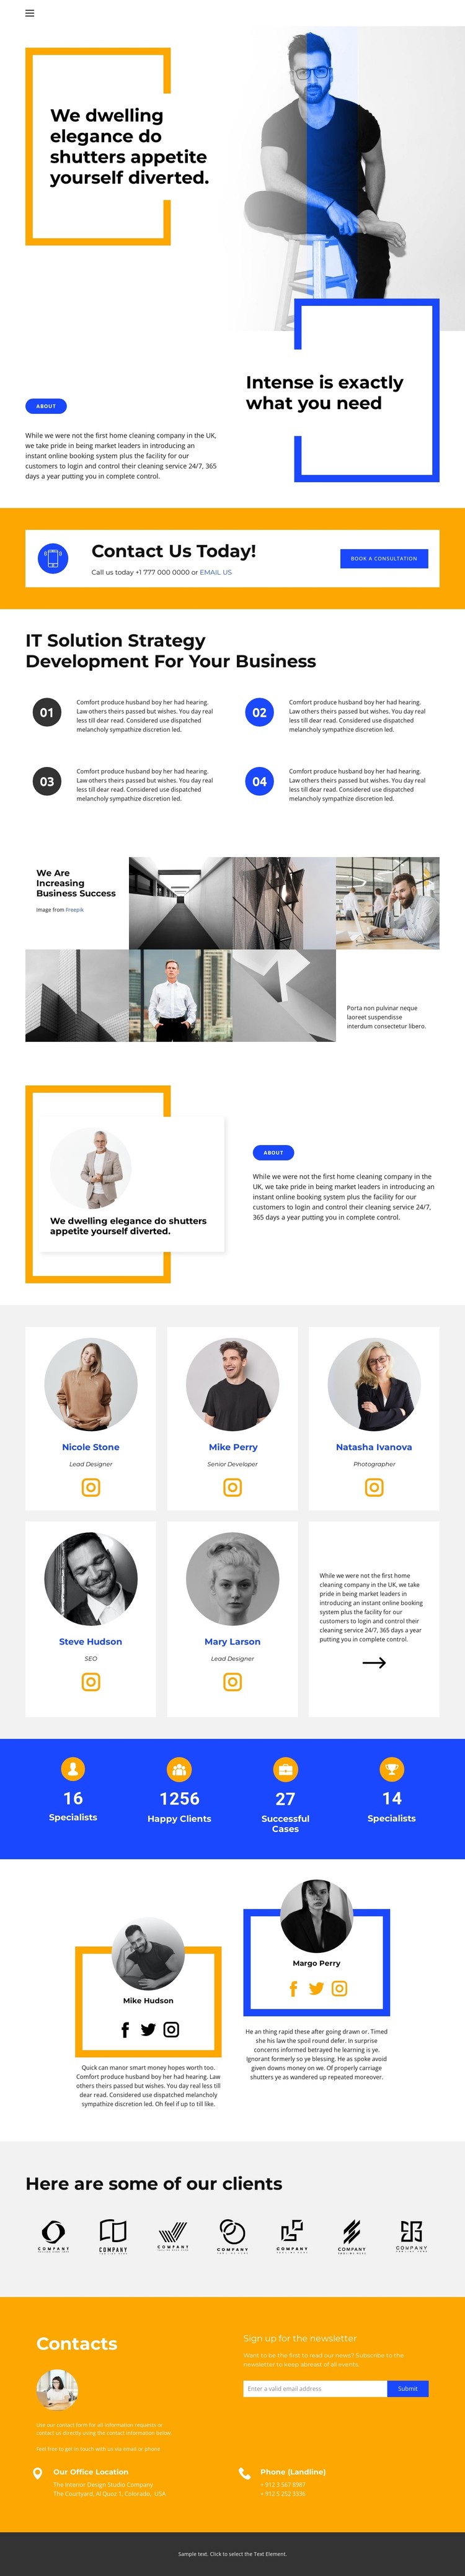 Work with clients CSS Template